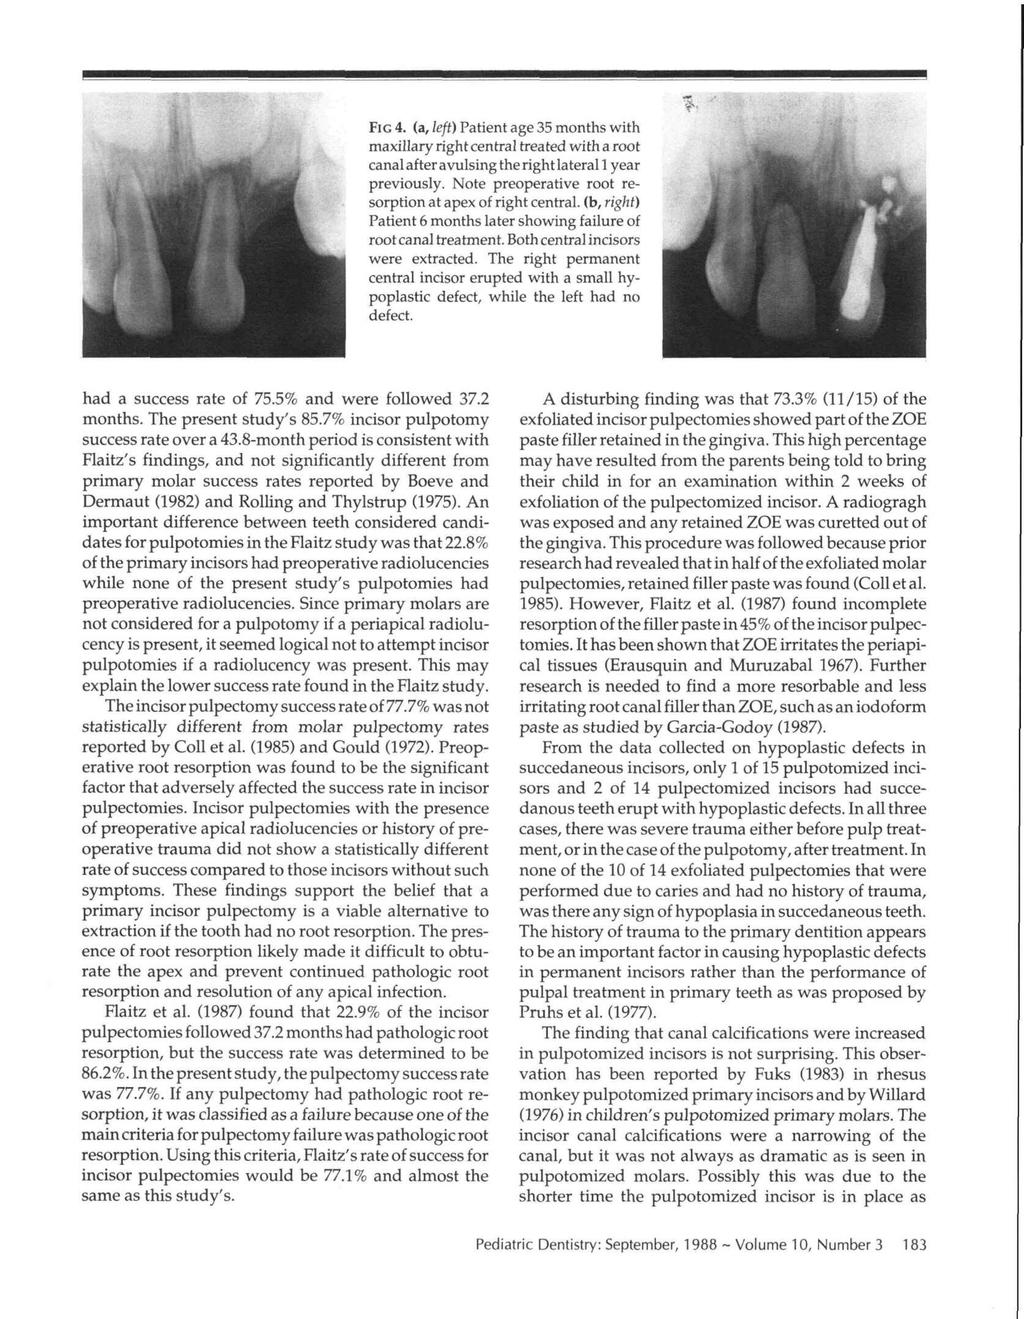 FIG 4. (a, left) Patient age 35 months with maxillary right central treated with a root canal after avulsing the right lateral 1 year previously.